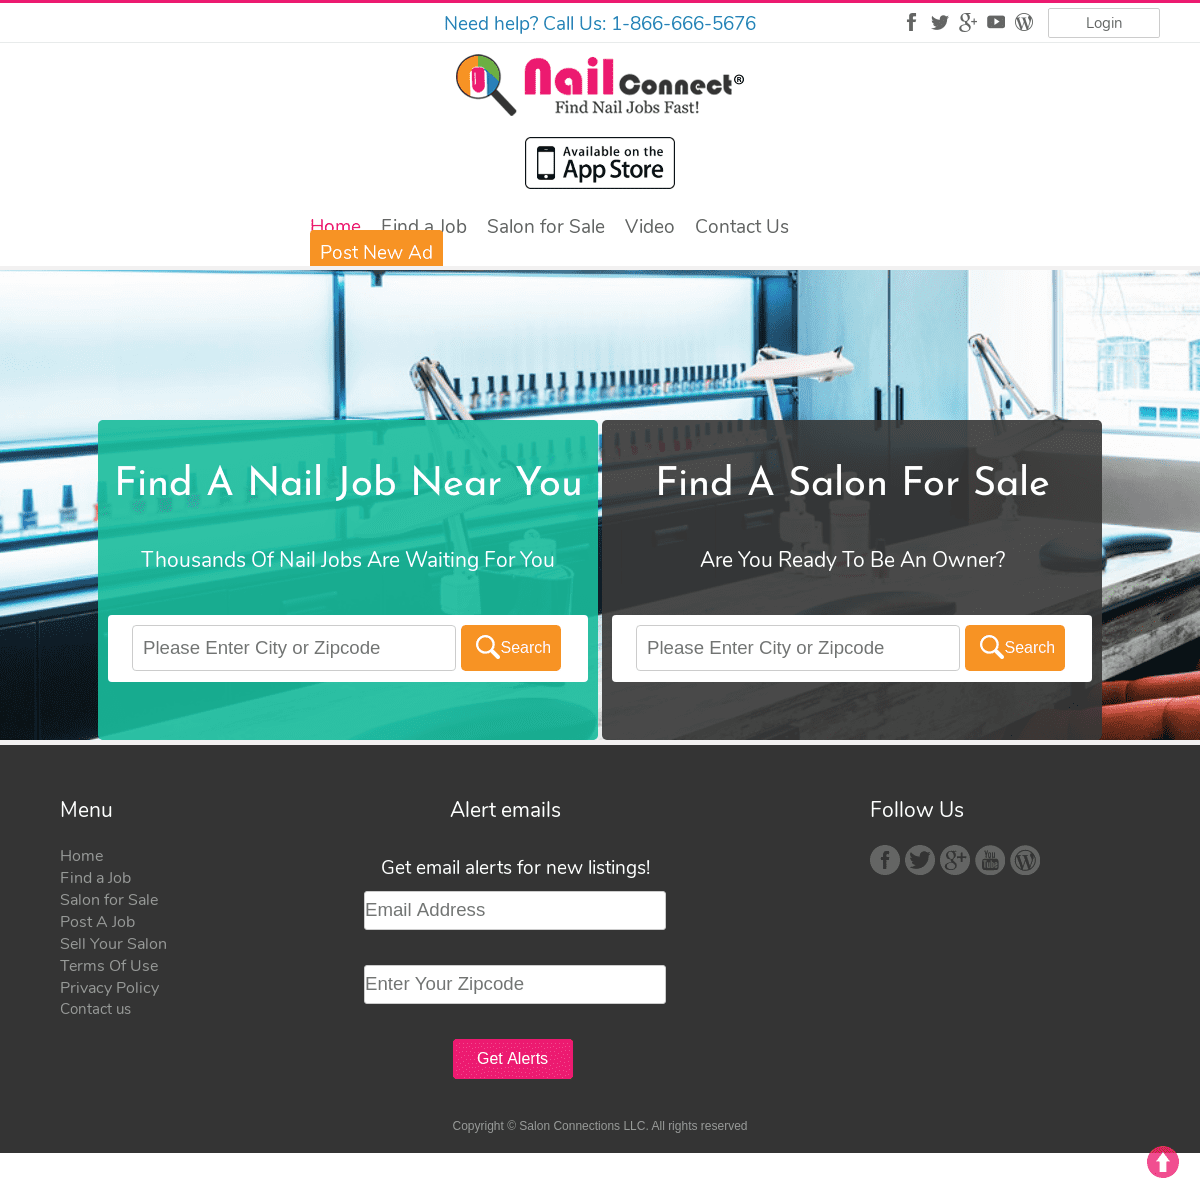 A complete backup of nailconnect.com